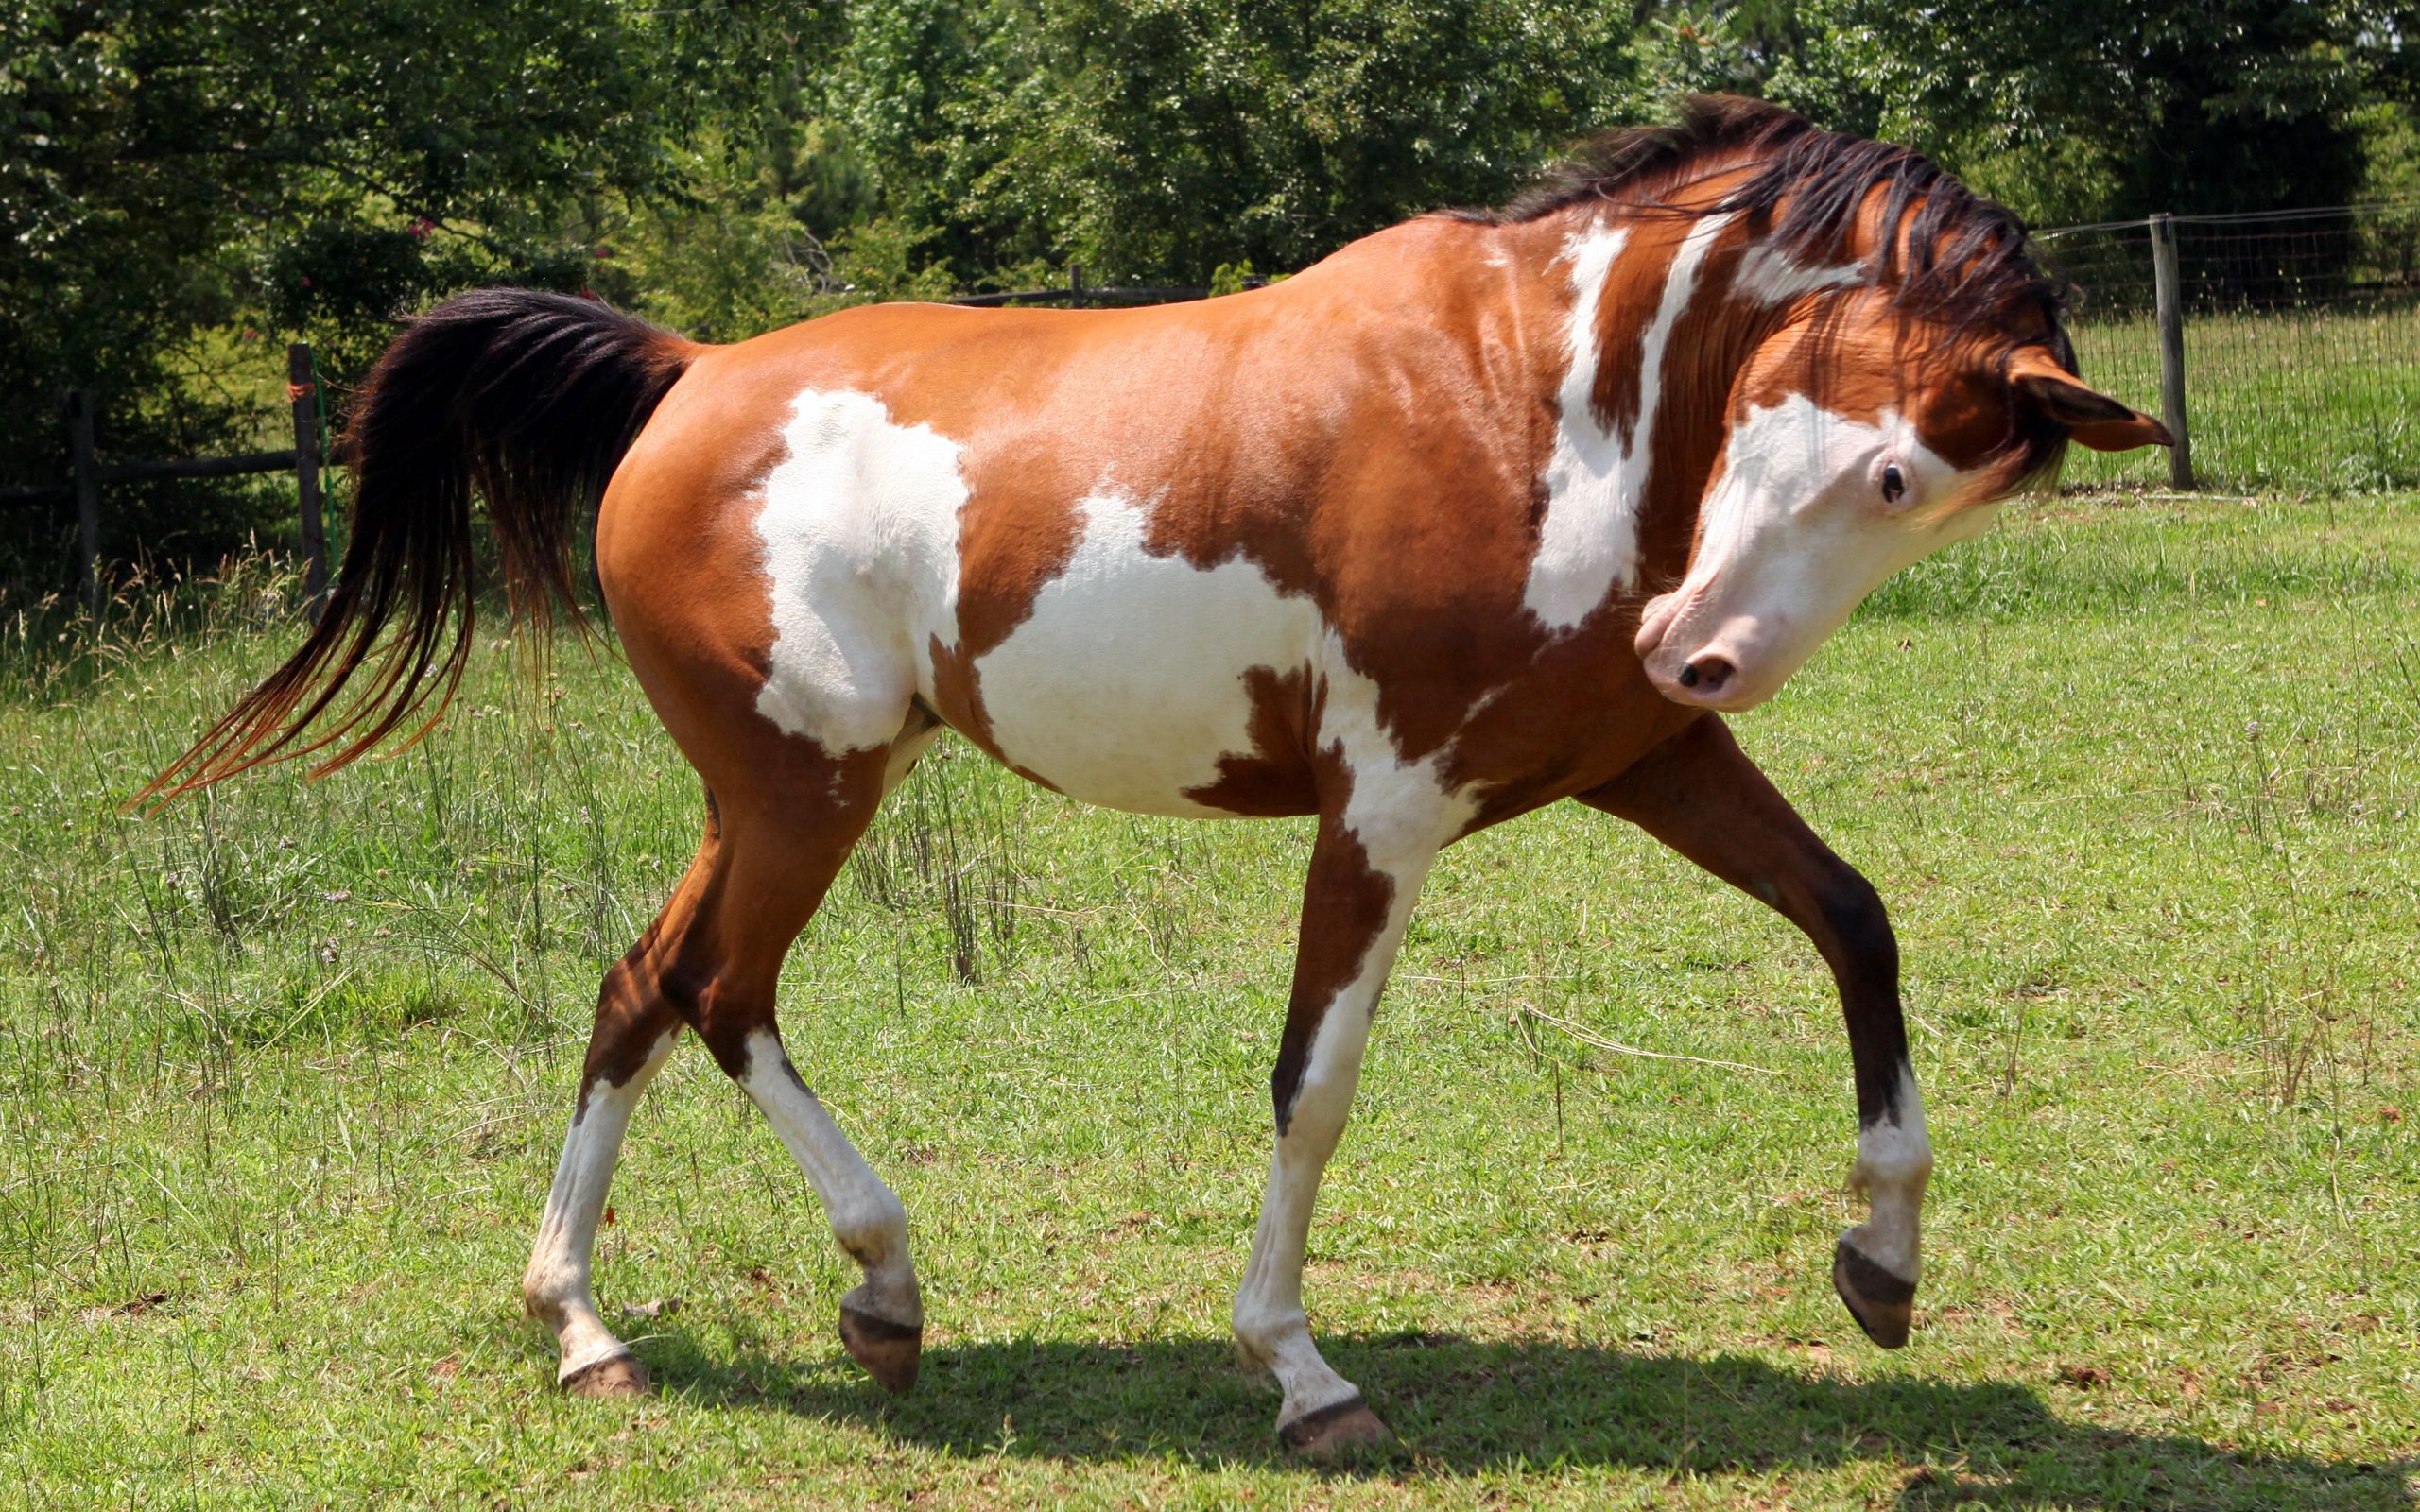 animals, grass, spotted, spotty, stroll, horse